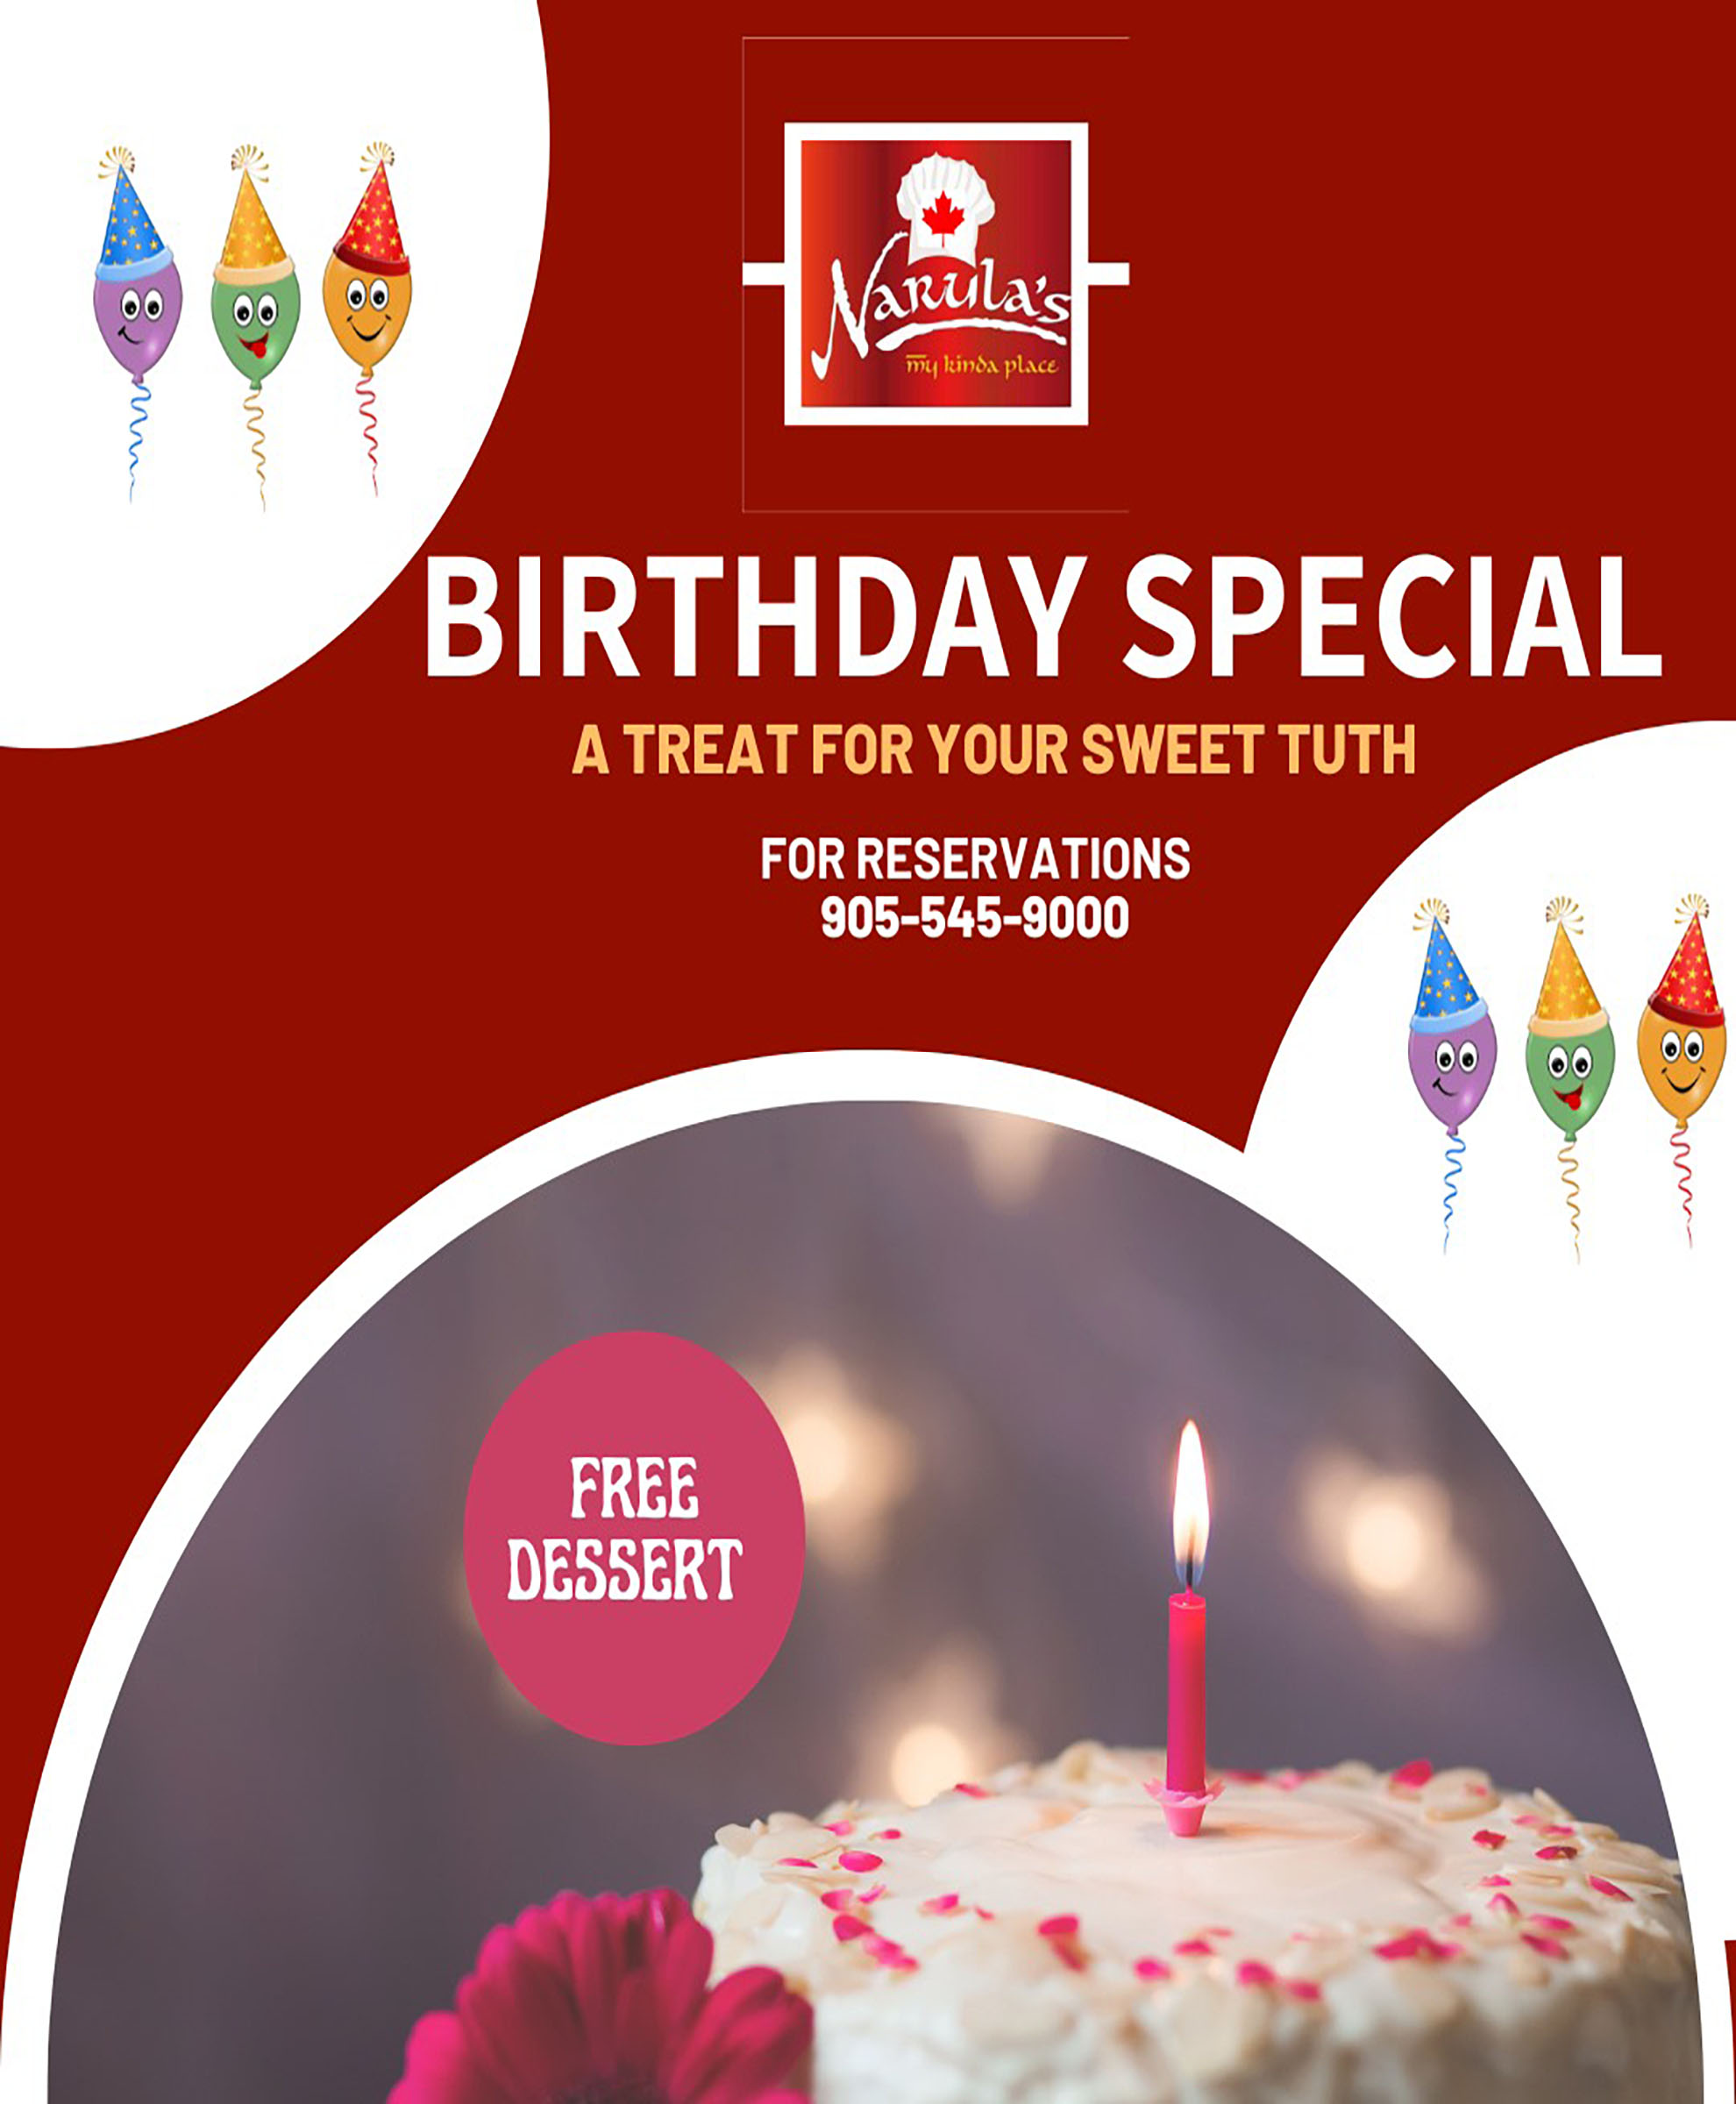 Celebrate your birthdays at Narula's Authentic Indian Cuisine